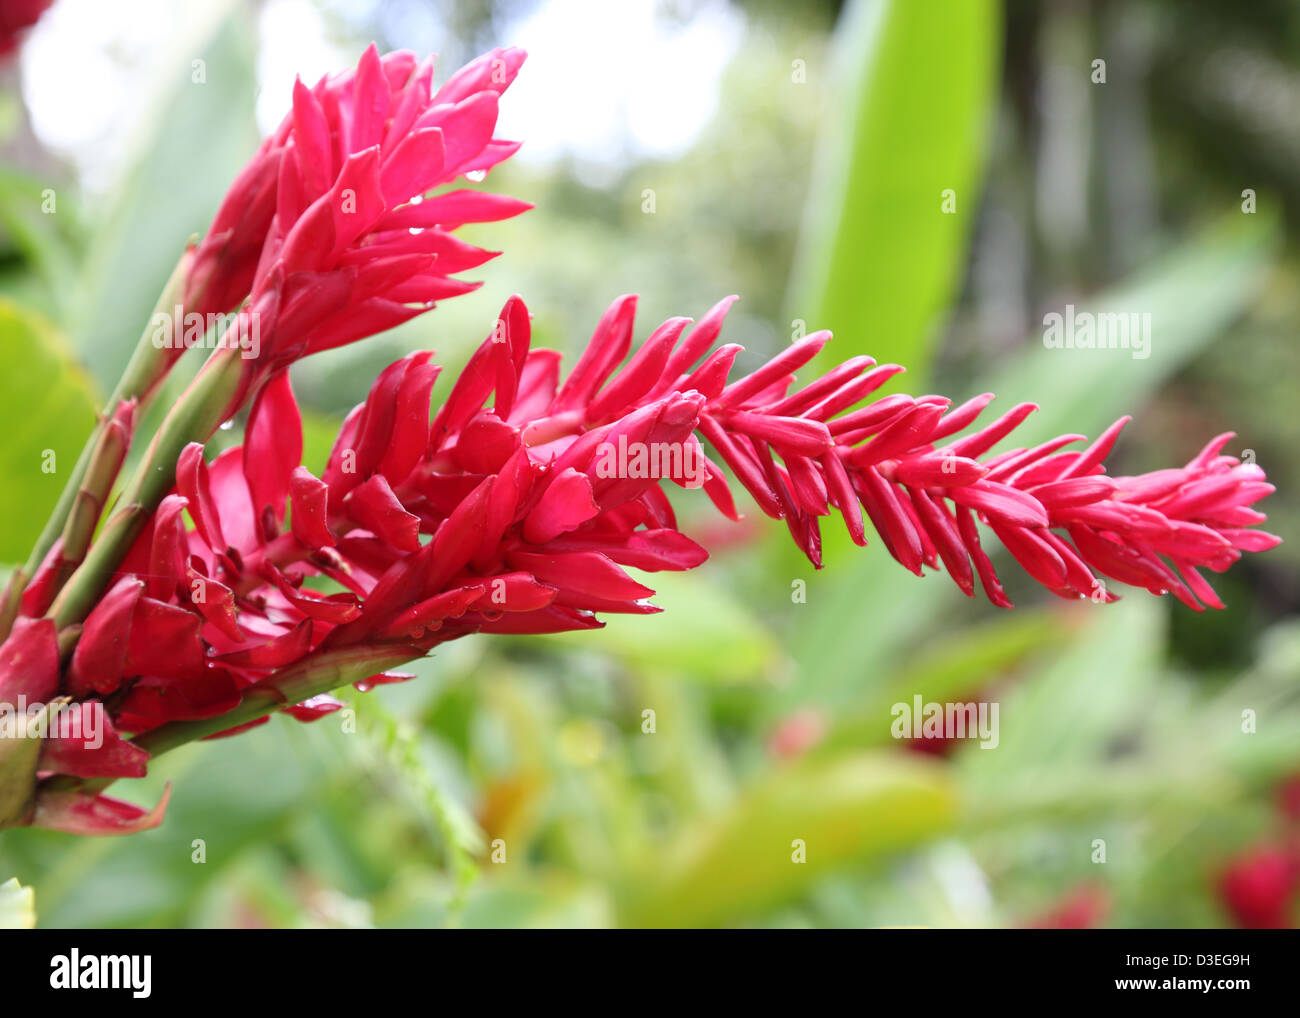 RED GINGER PLANT,BARBADOS Stock Photo